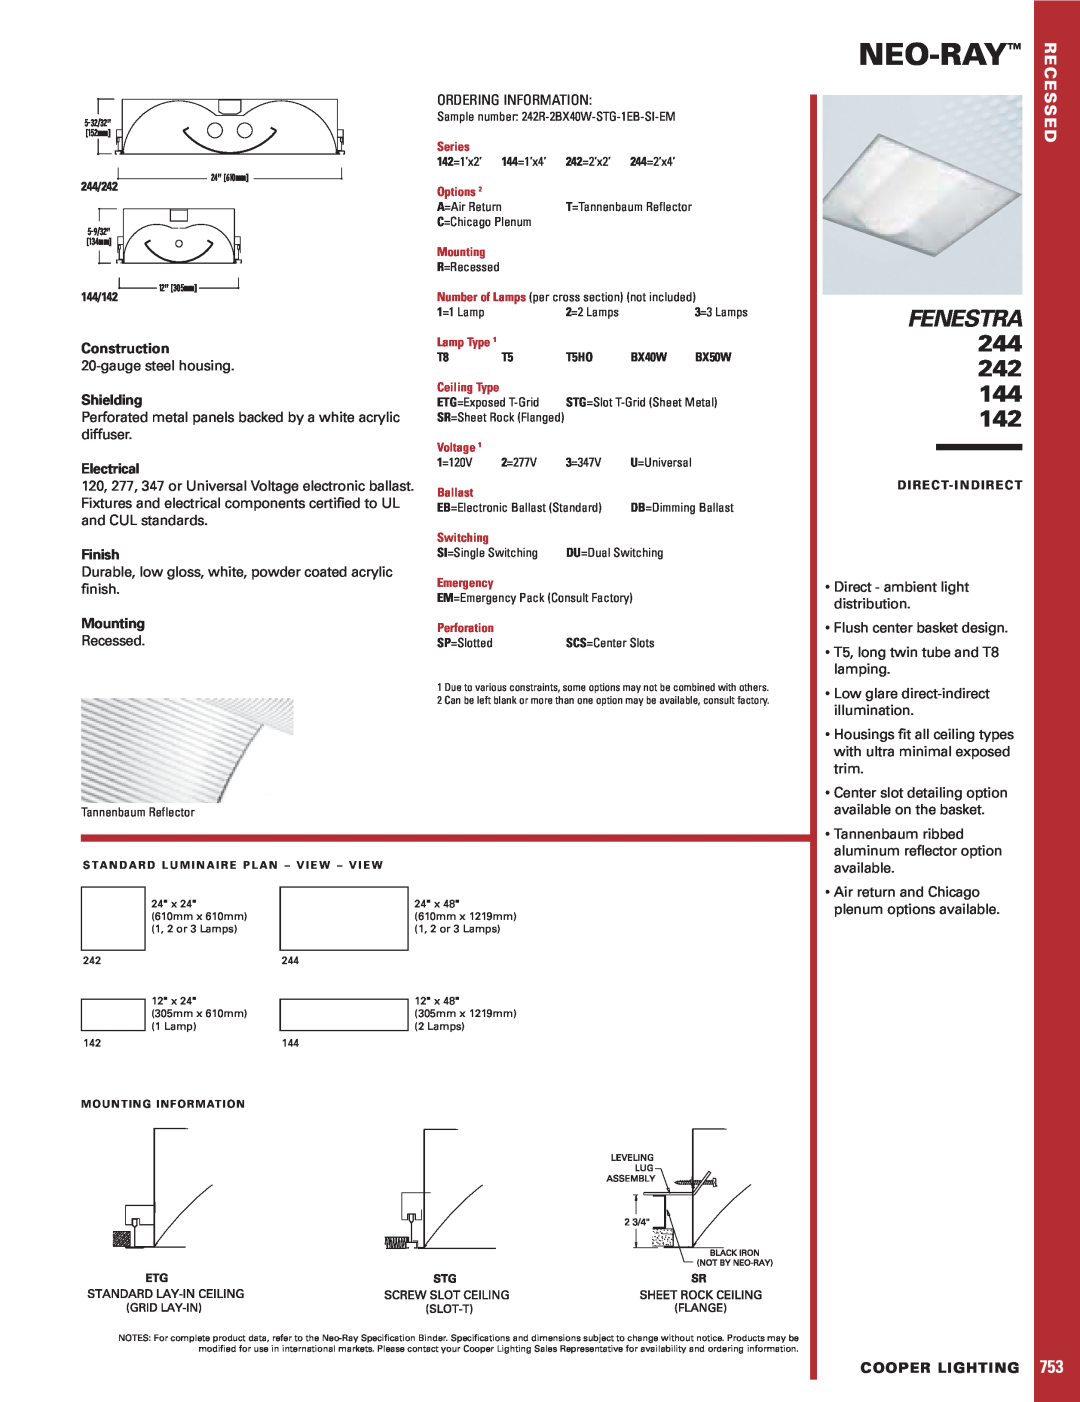 Cooper Lighting 242, 244, 144, 142 specifications Neo-Ray, Fenestra, Construction, Shielding, Electrical, Finish, Mounting 